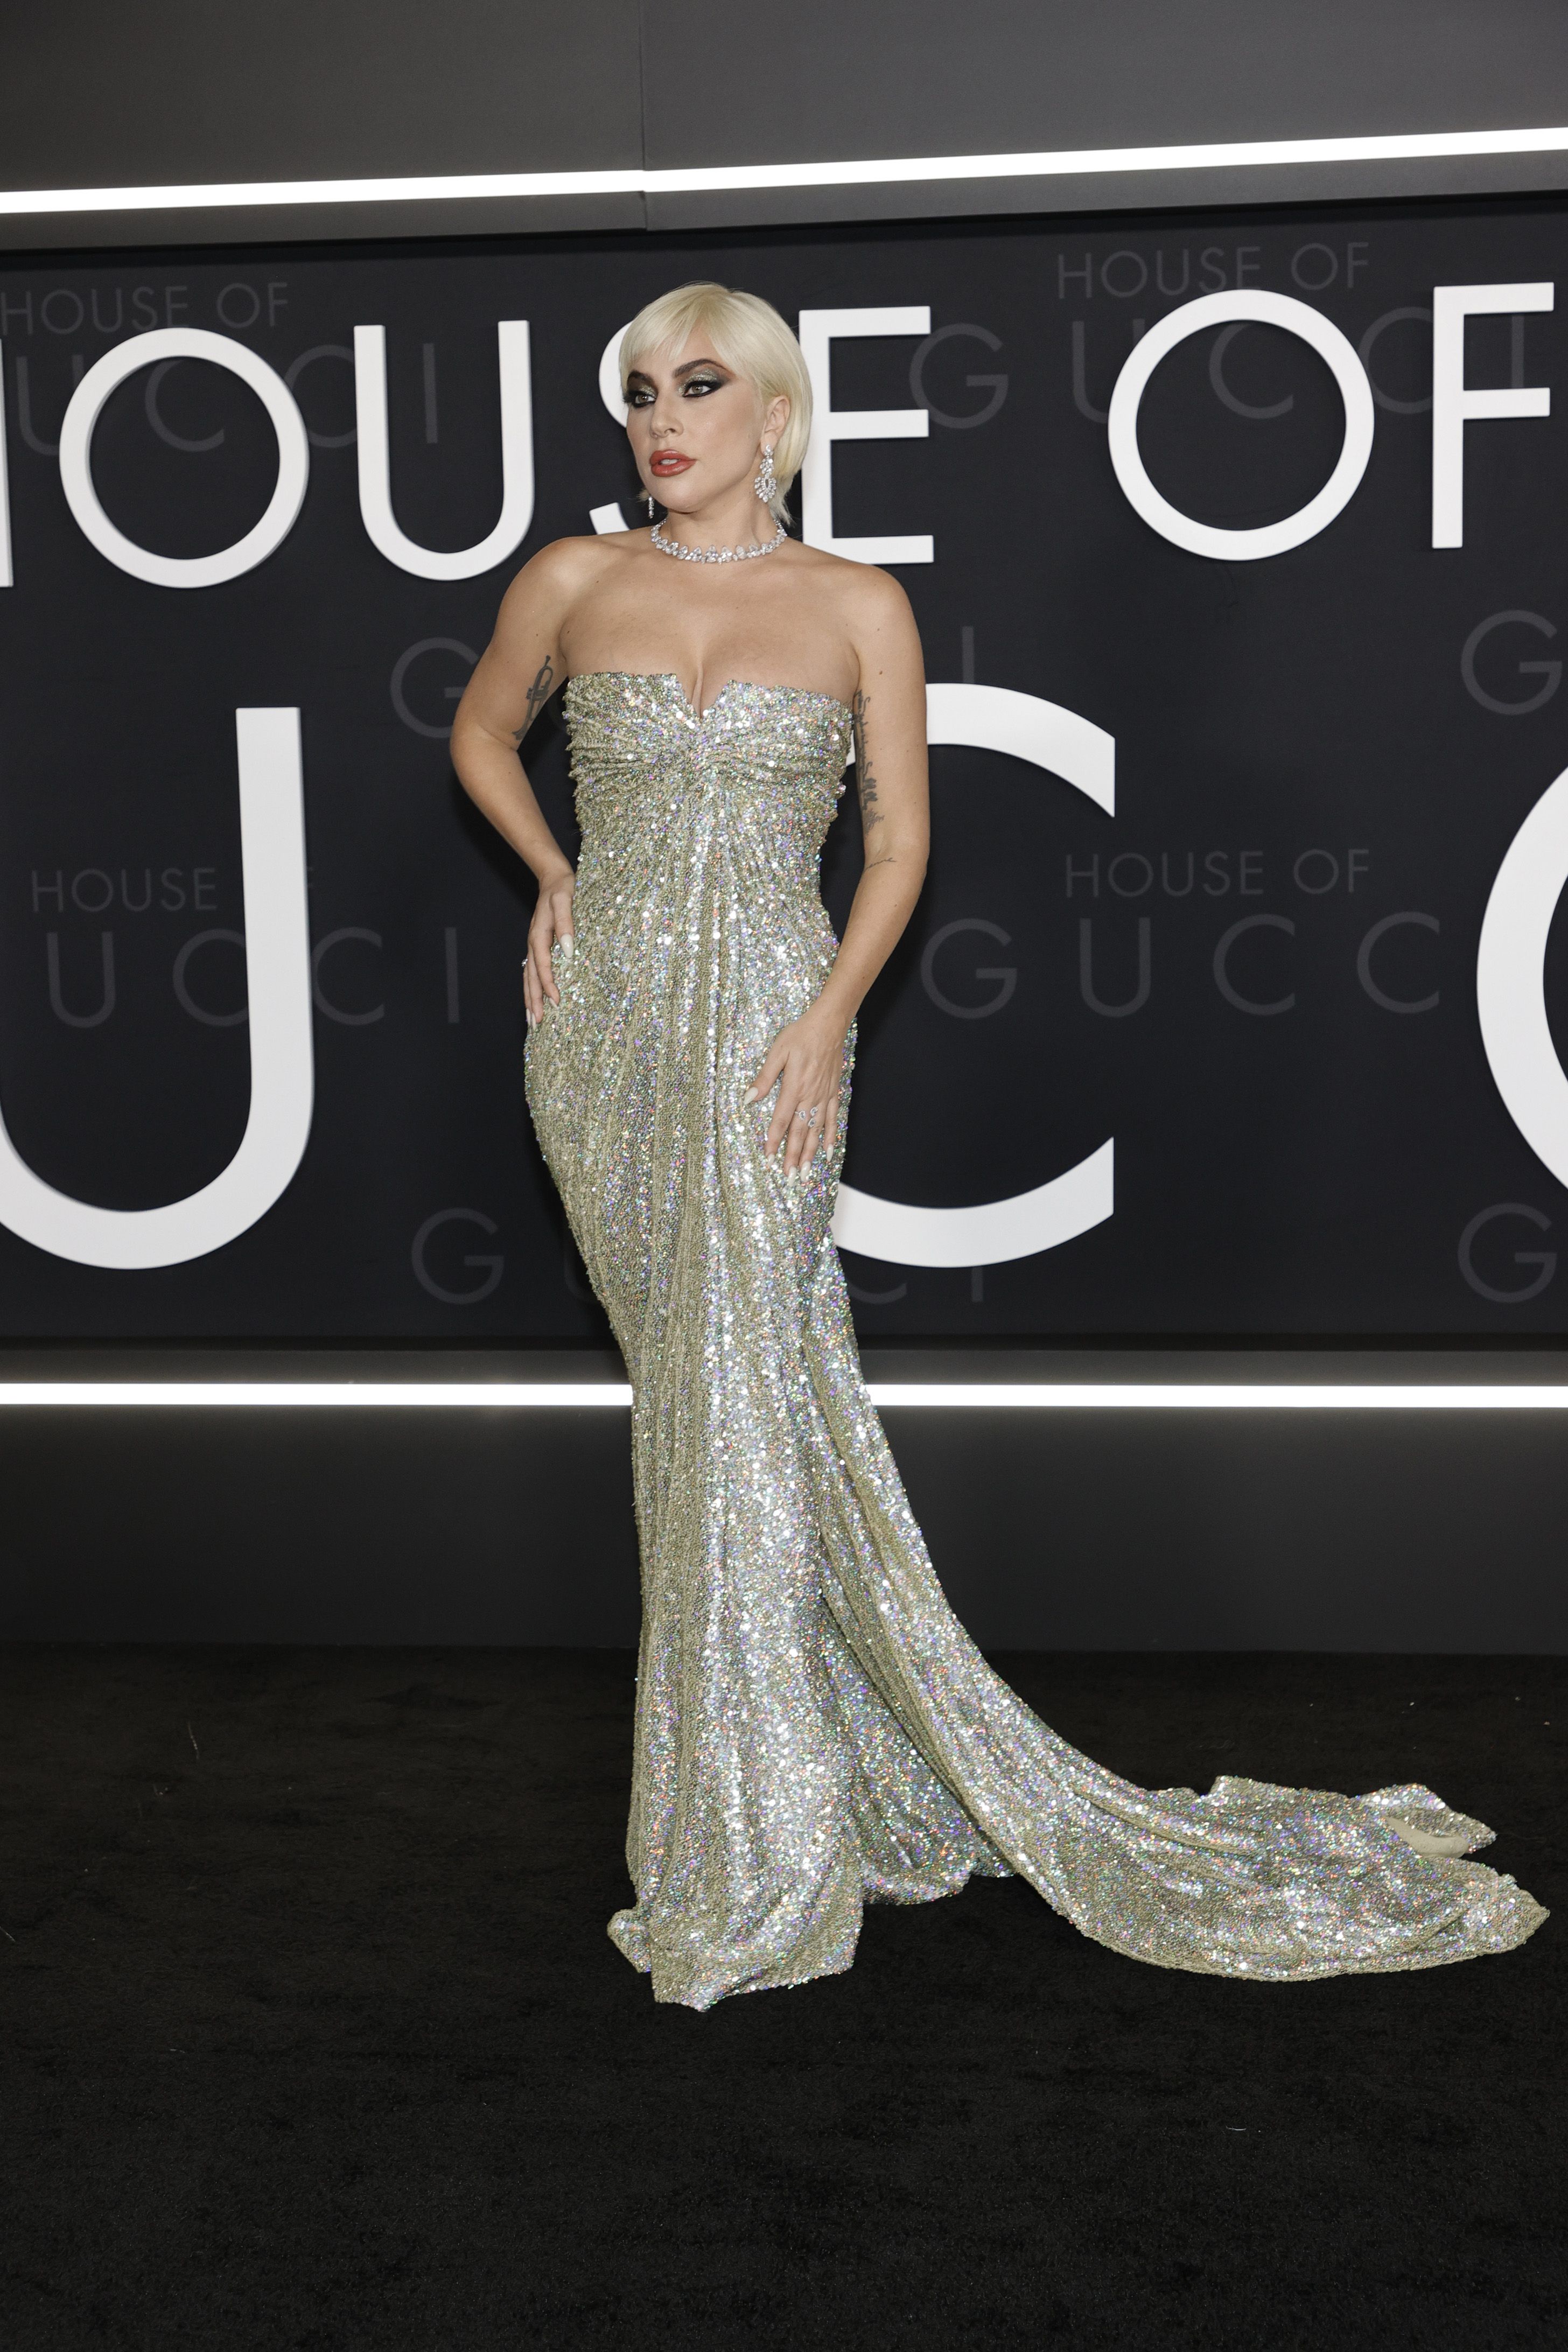 See Lady Gaga's 'House of Gucci' Red-Carpet Looks